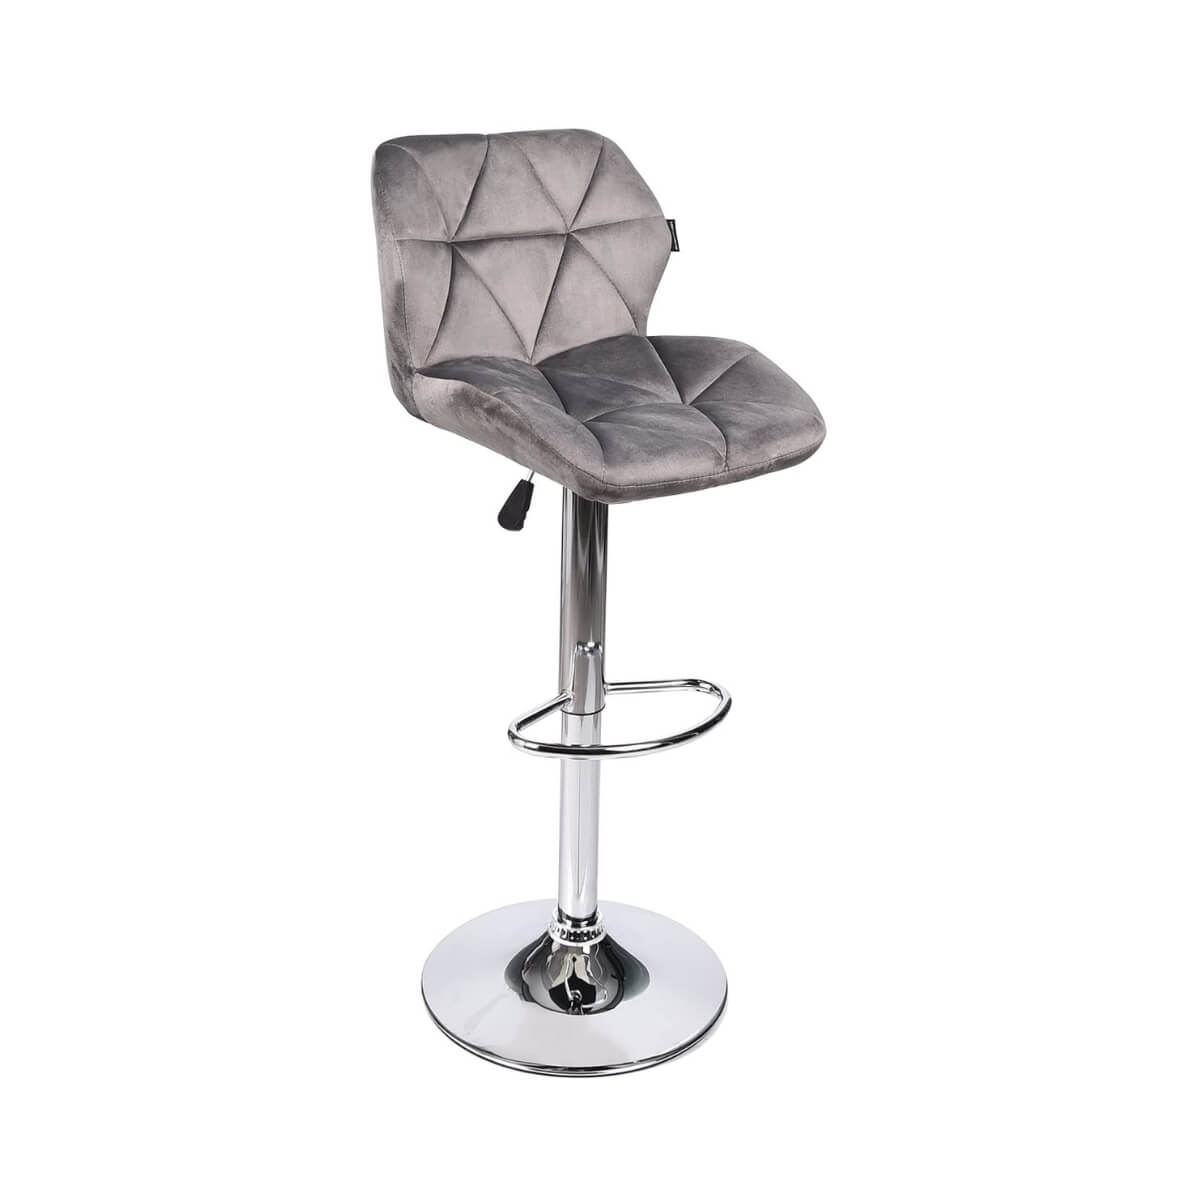 Faux leather silver bar stool ow005